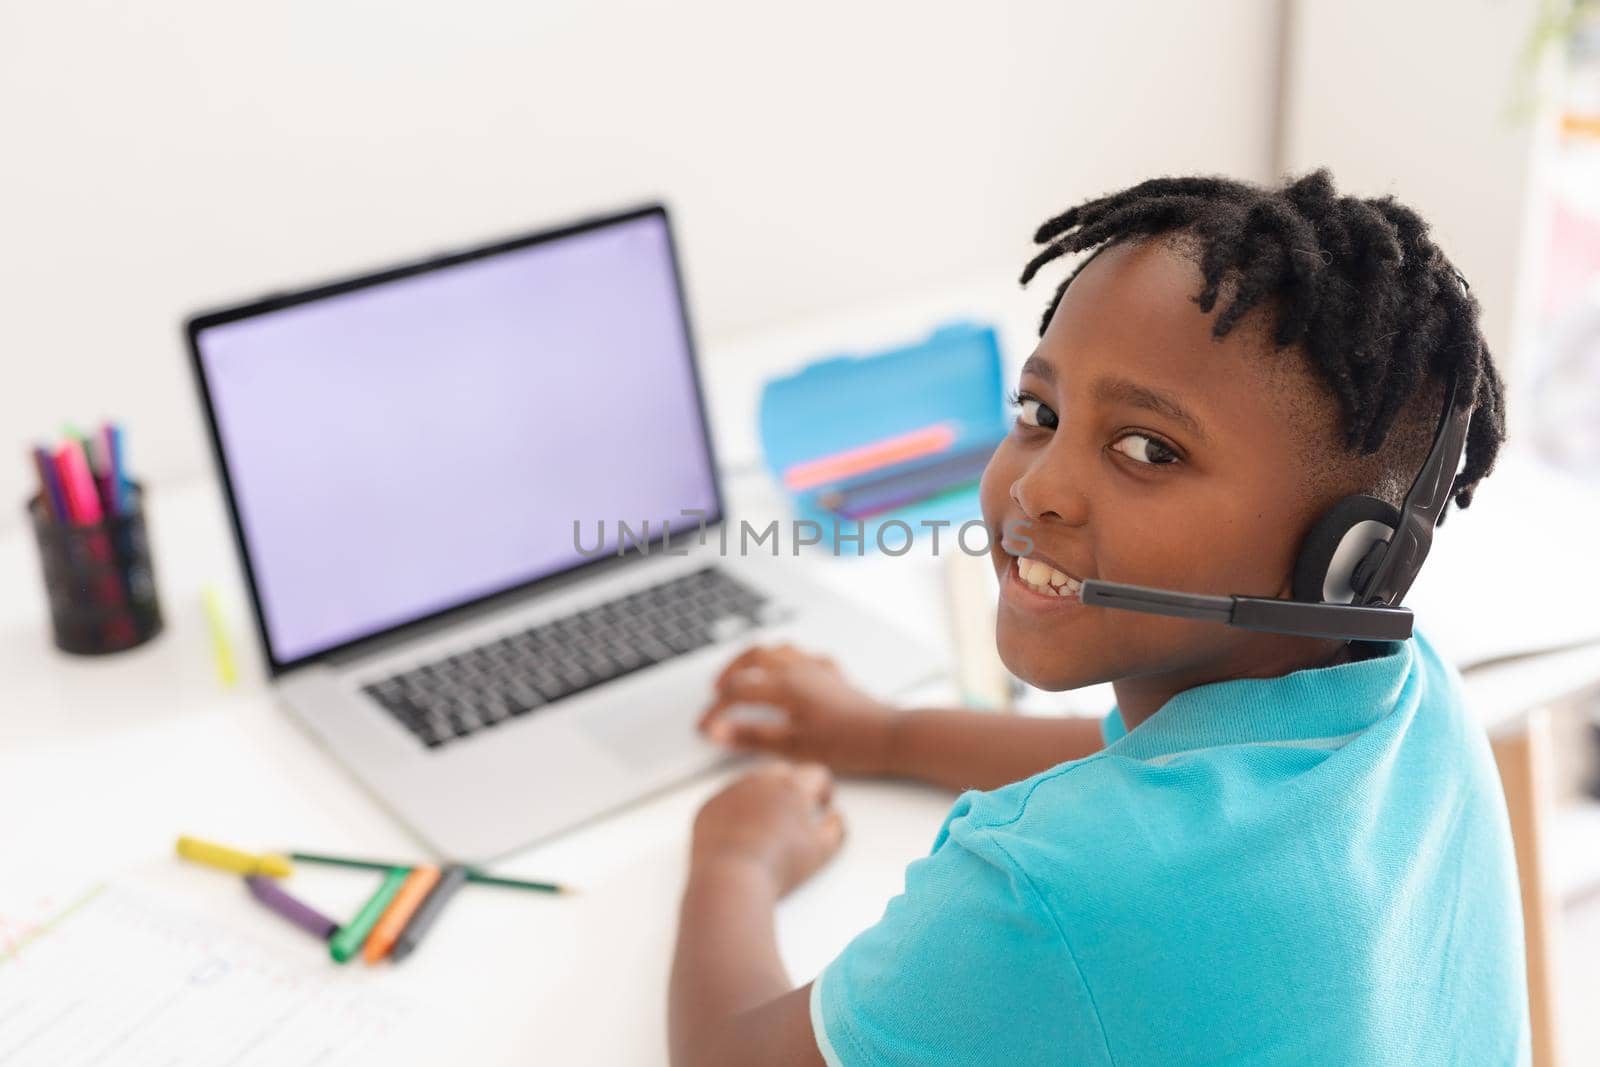 Portrait of african american boy wearing headset at desk using laptop for online school lesson. staying at home in isolation during quarantine lockdown.